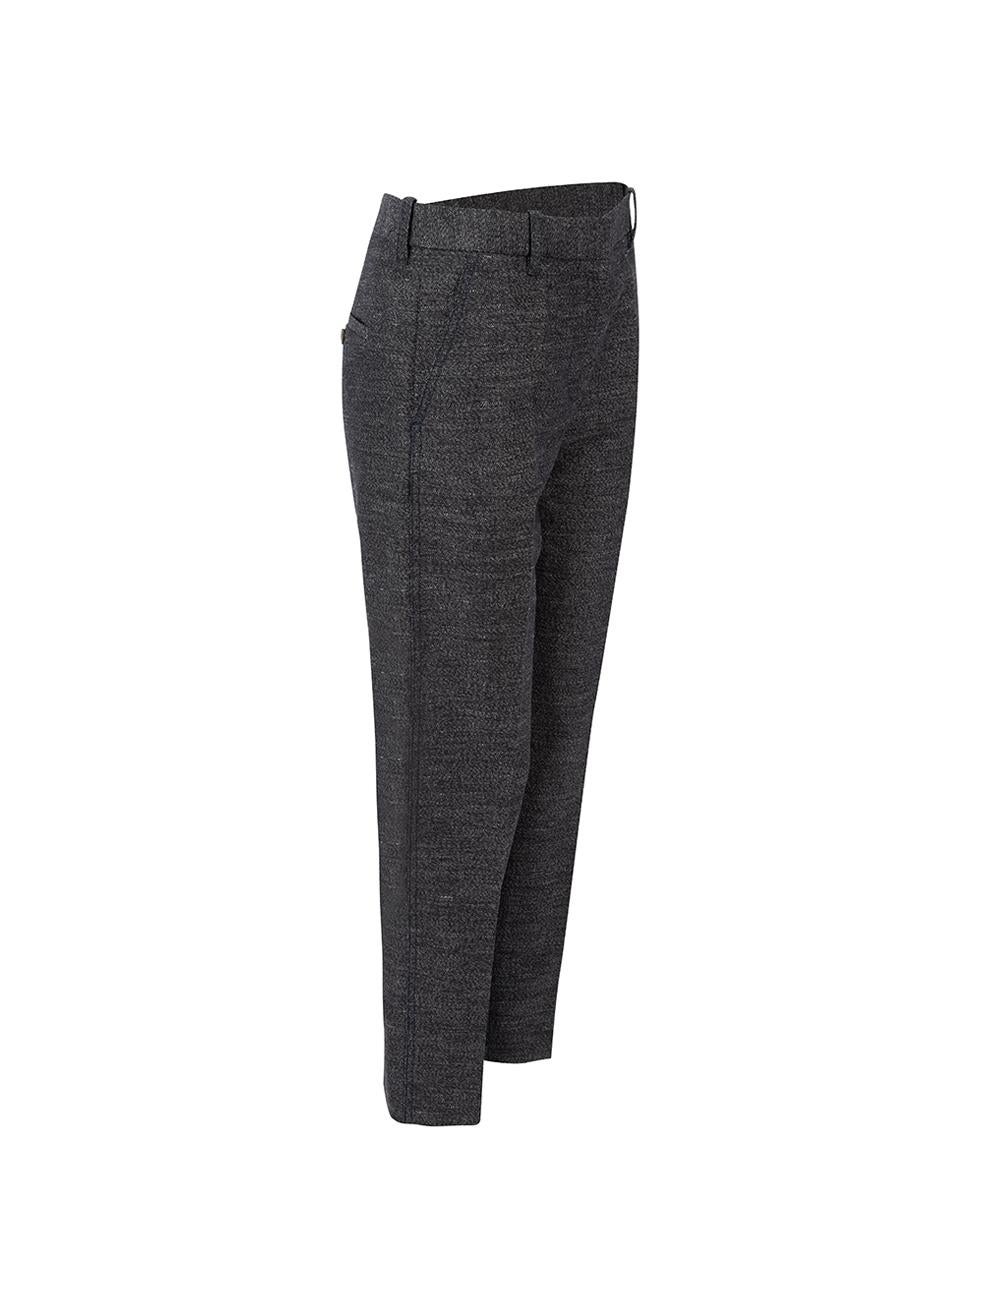 CONDITION is Very good. Hardly any visible wear to trousers is evident on this used 3.1 Phillip Lim designer resale item.



Details


Grey

Wool

Trousers

Slim fit

Mid rise

2x Side pockets

1x Back pocket

Fly zip, hook and button